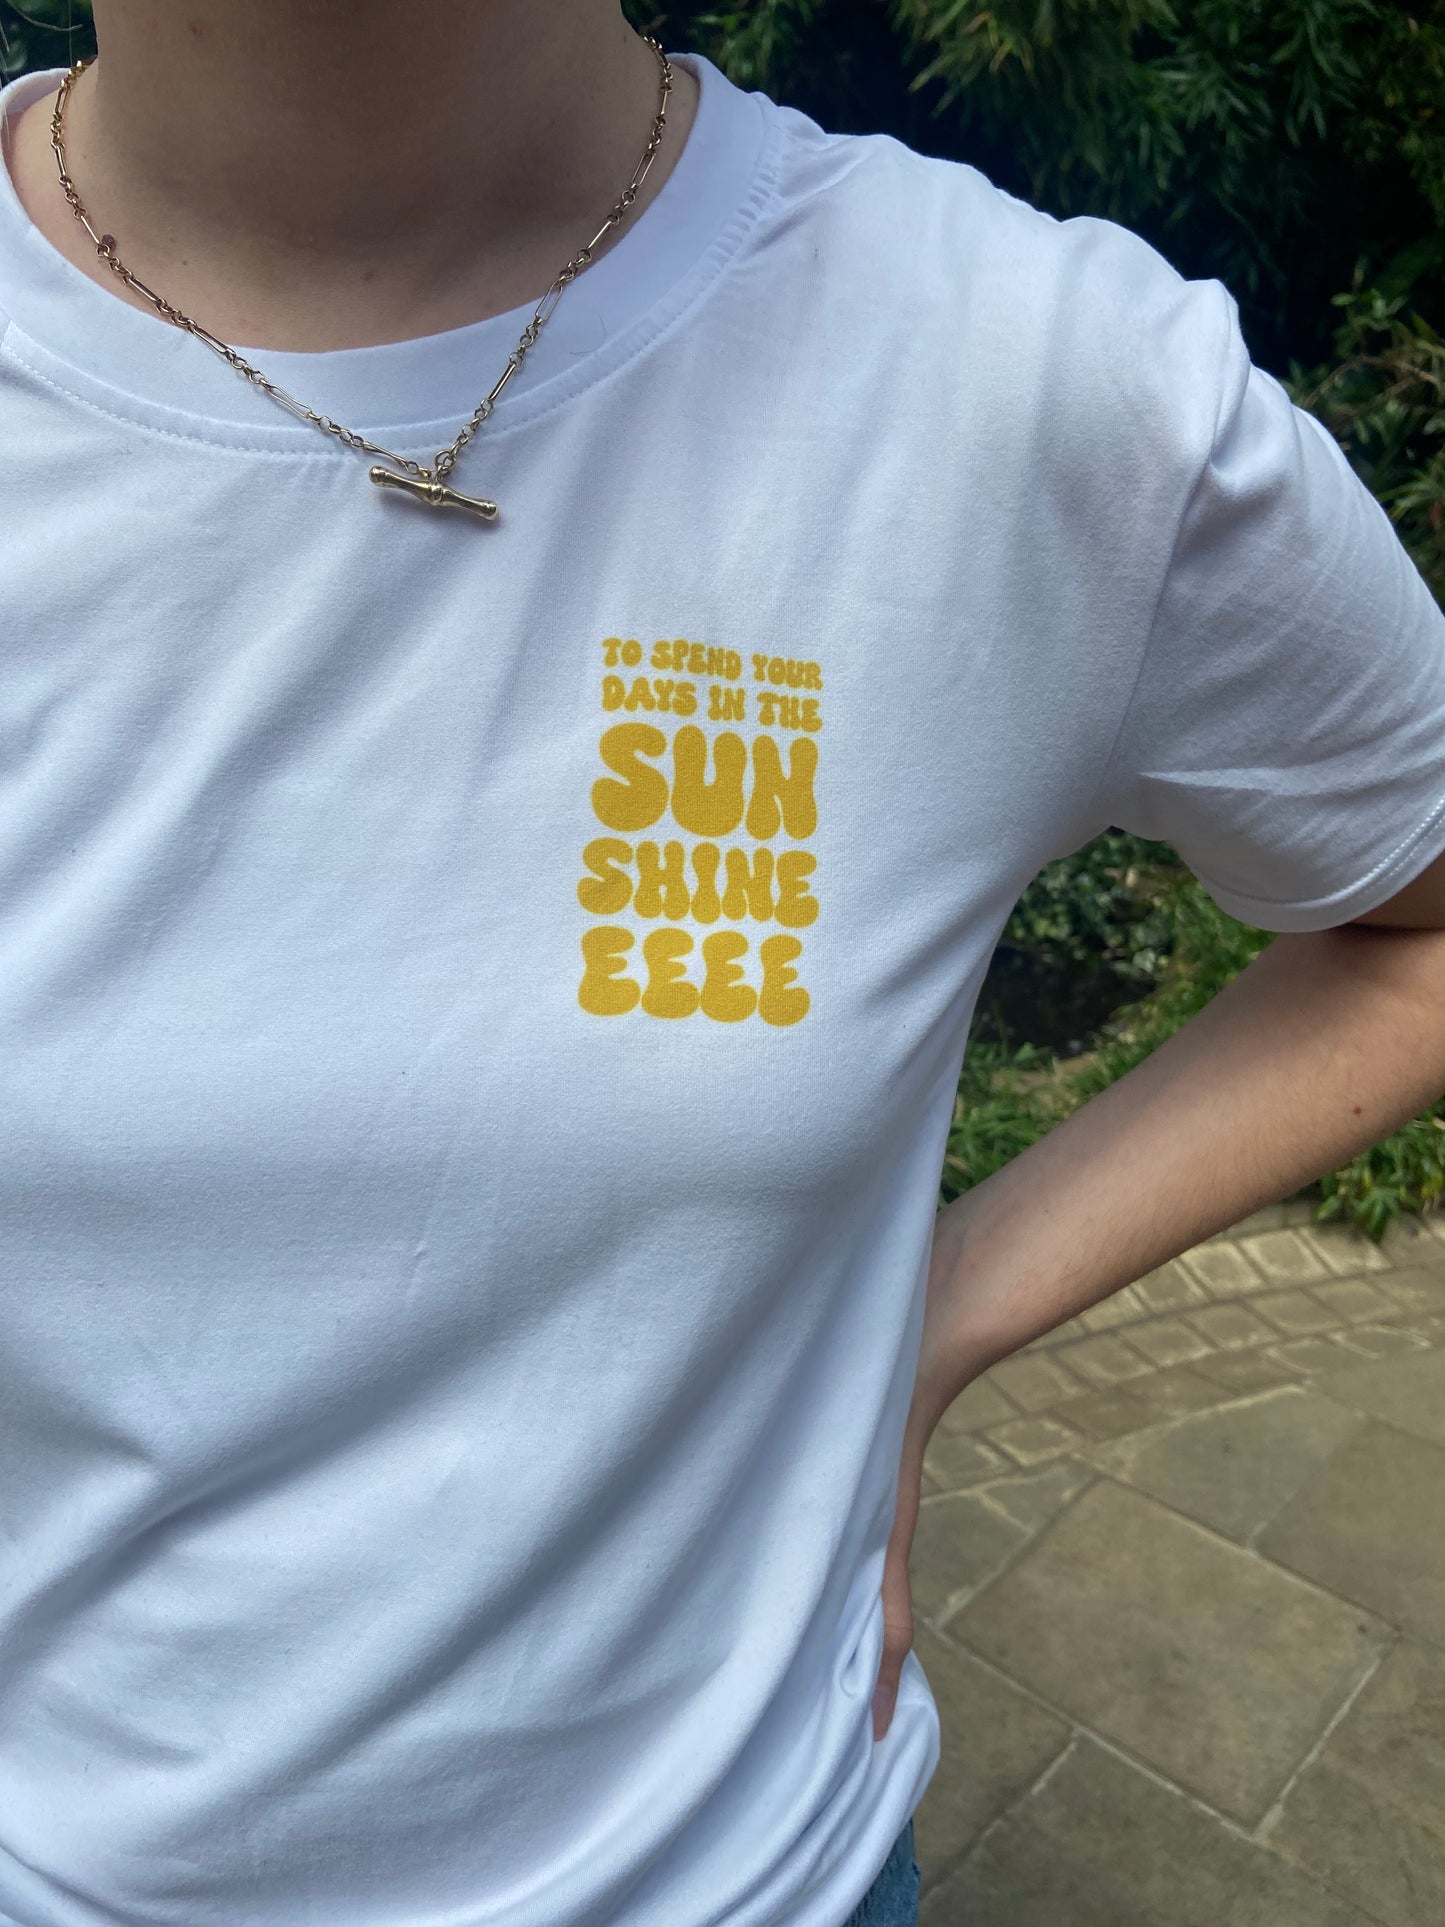 “Spend your days in the sunshine” T-shirt.